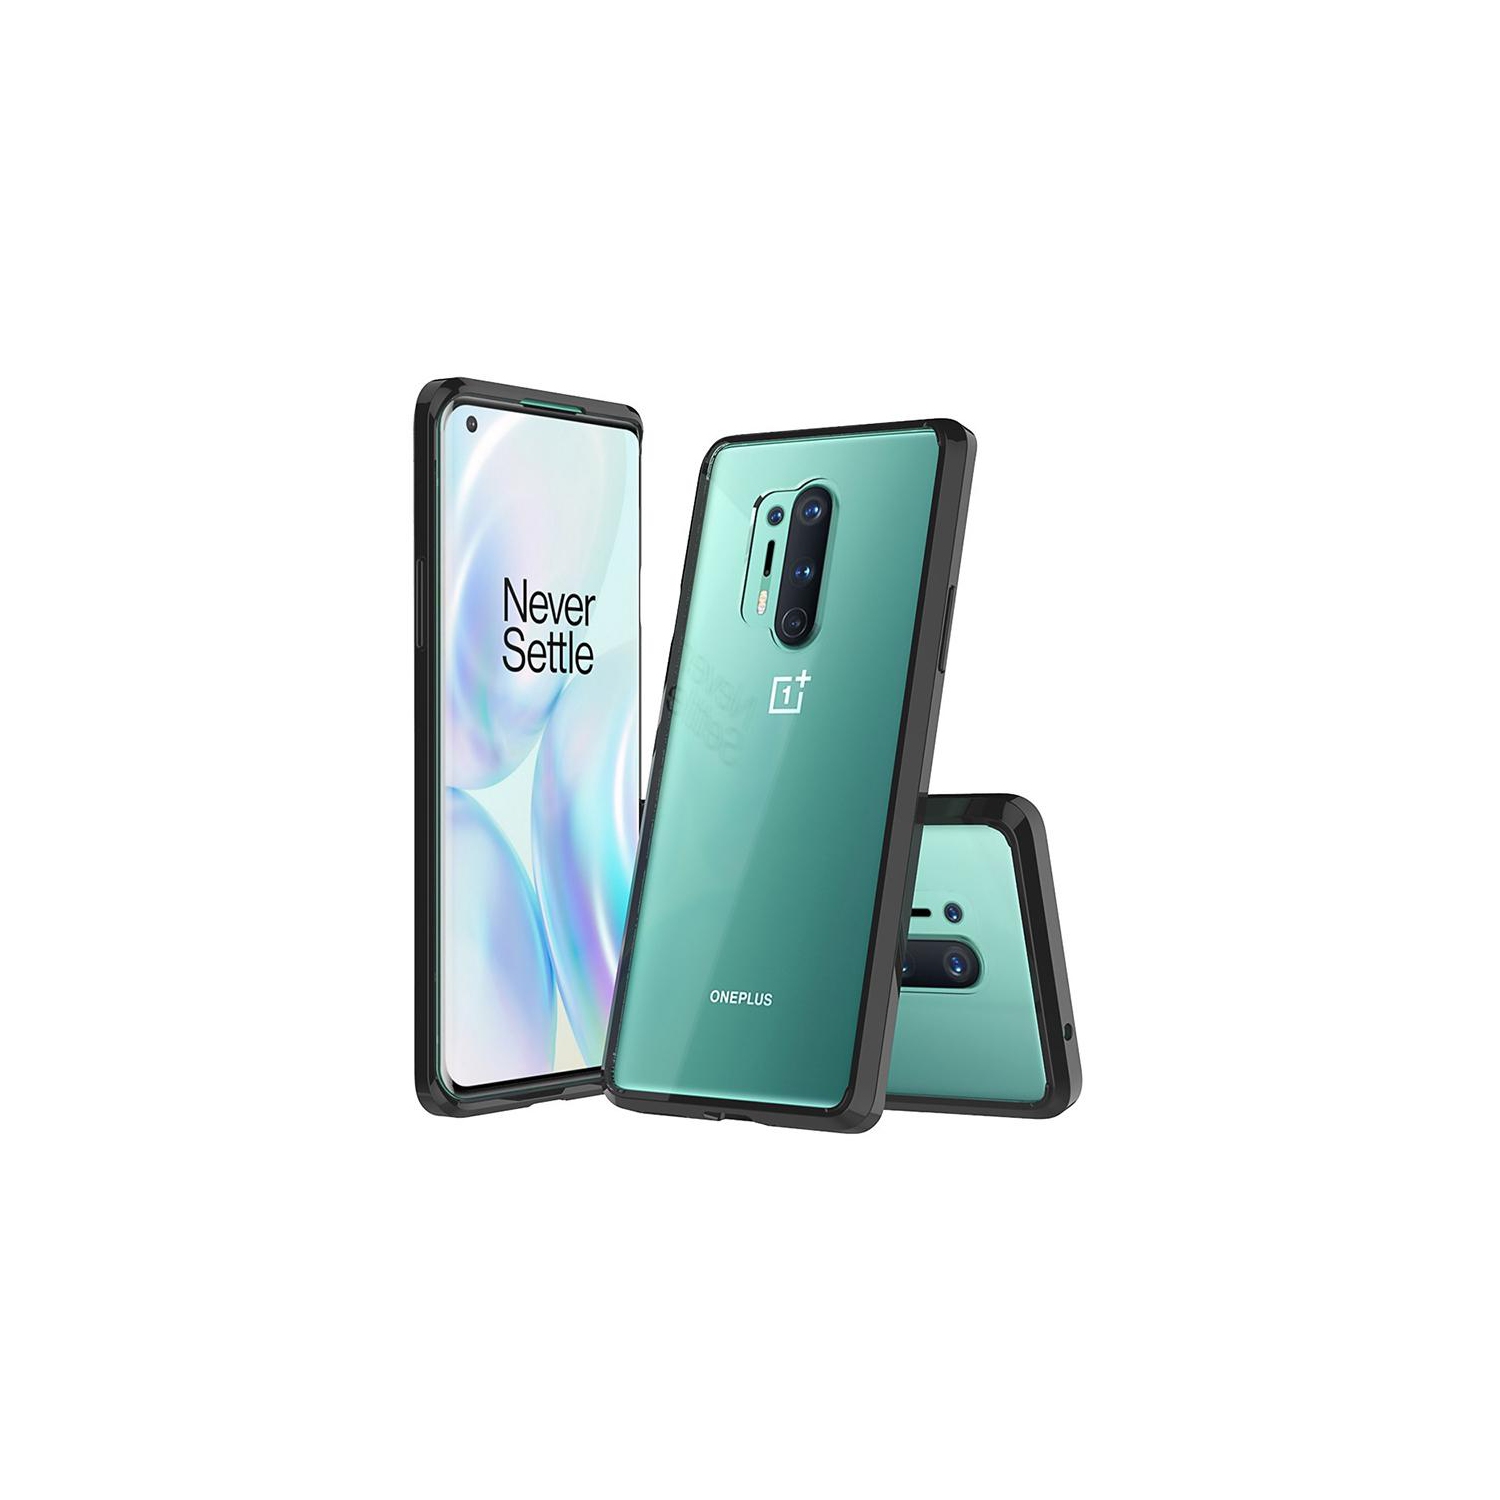 PANDACO Acrylic Black Hard Clear Case for OnePlus 8 Pro